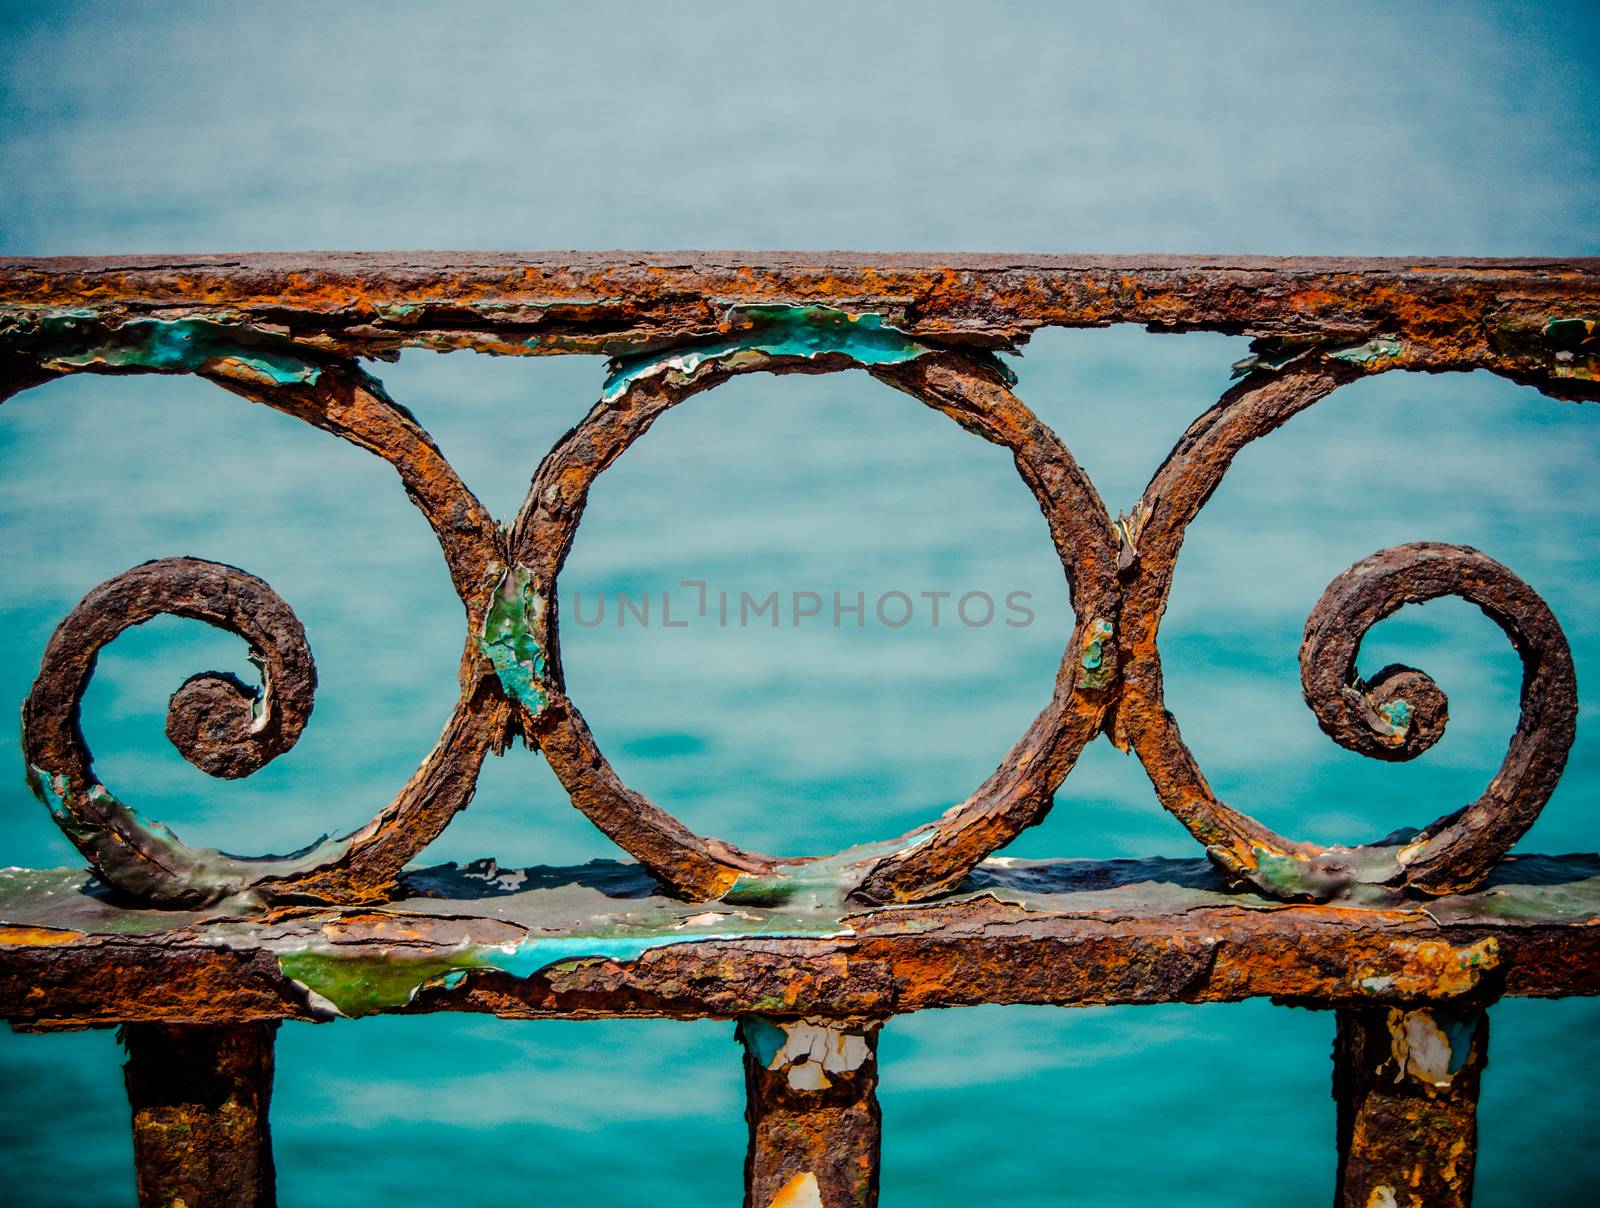 VIntage Rusty Railings By The Sea In The Port Of Marseille, France